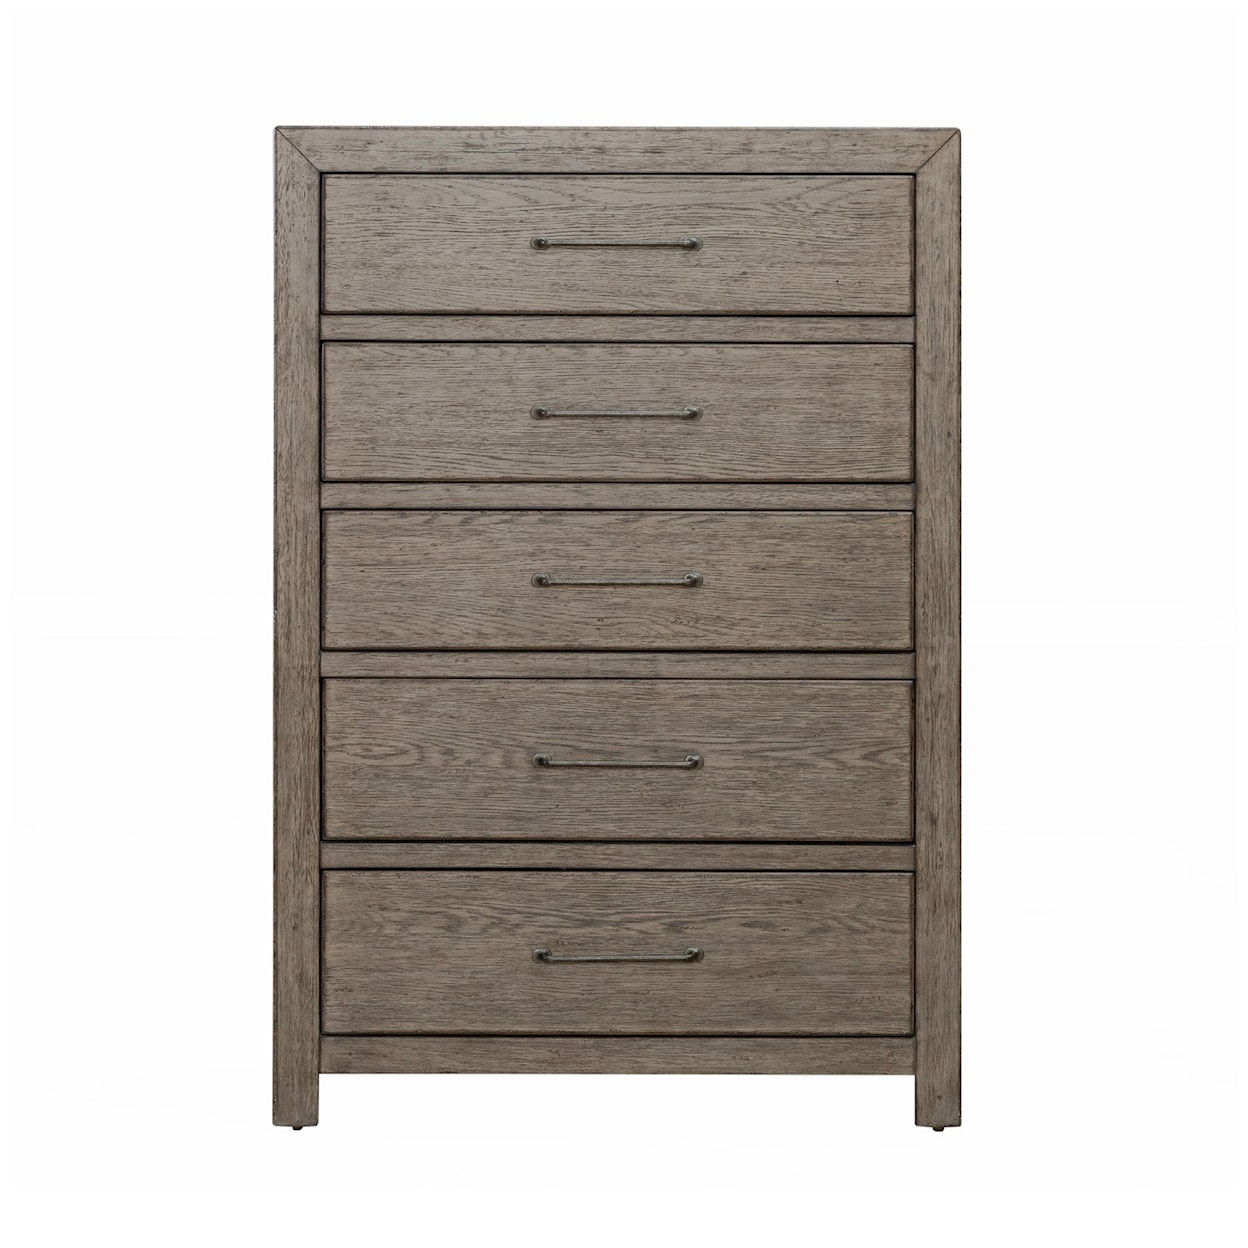 Libby Skyview Lodge 5-Drawer Bedroom Chest